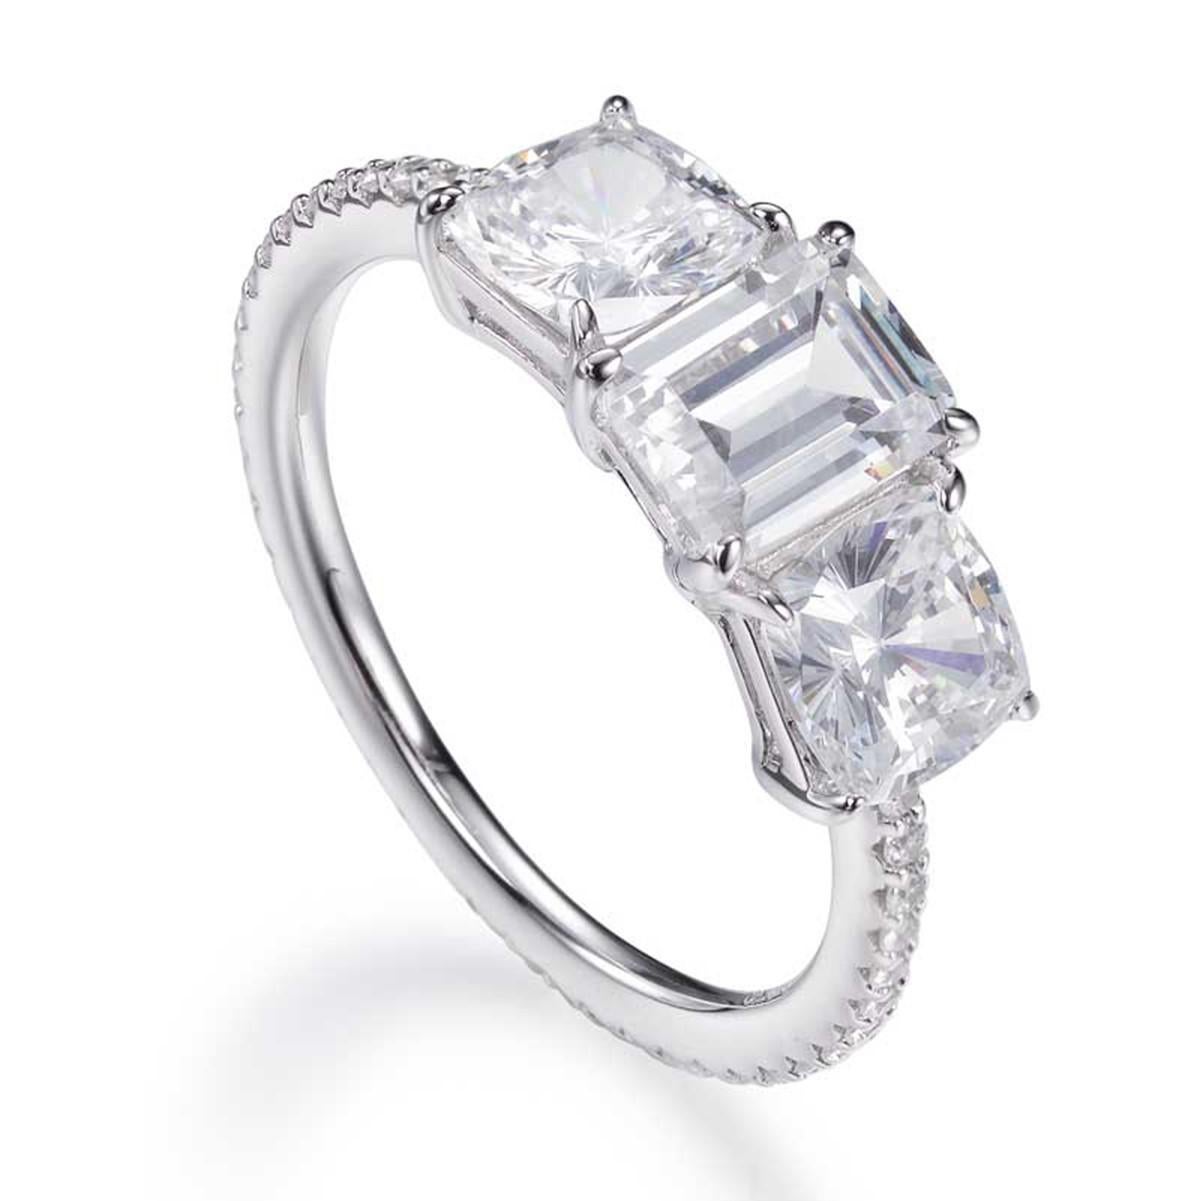 The dazzling emerald cut cubic zirconia in this breath-taking ring is flanked by two stunning princess cut cubic zirconia set into a band of sparkling brilliant cuts.

Composed of 925 sterling silver with a high gloss white rhodium finish.

Whether